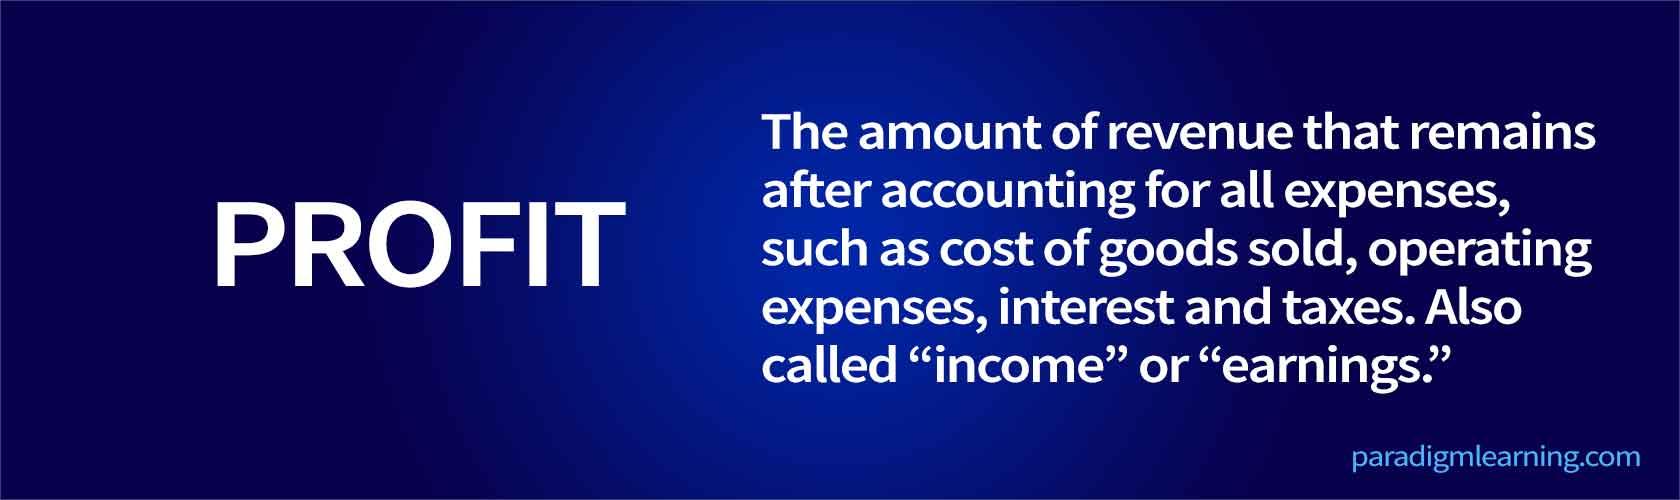 The amount of revenue that remains after accounting for all expenses, such as cost of goods sold, operating expenses, interest and taxes. Also called “income” or “earnings.”